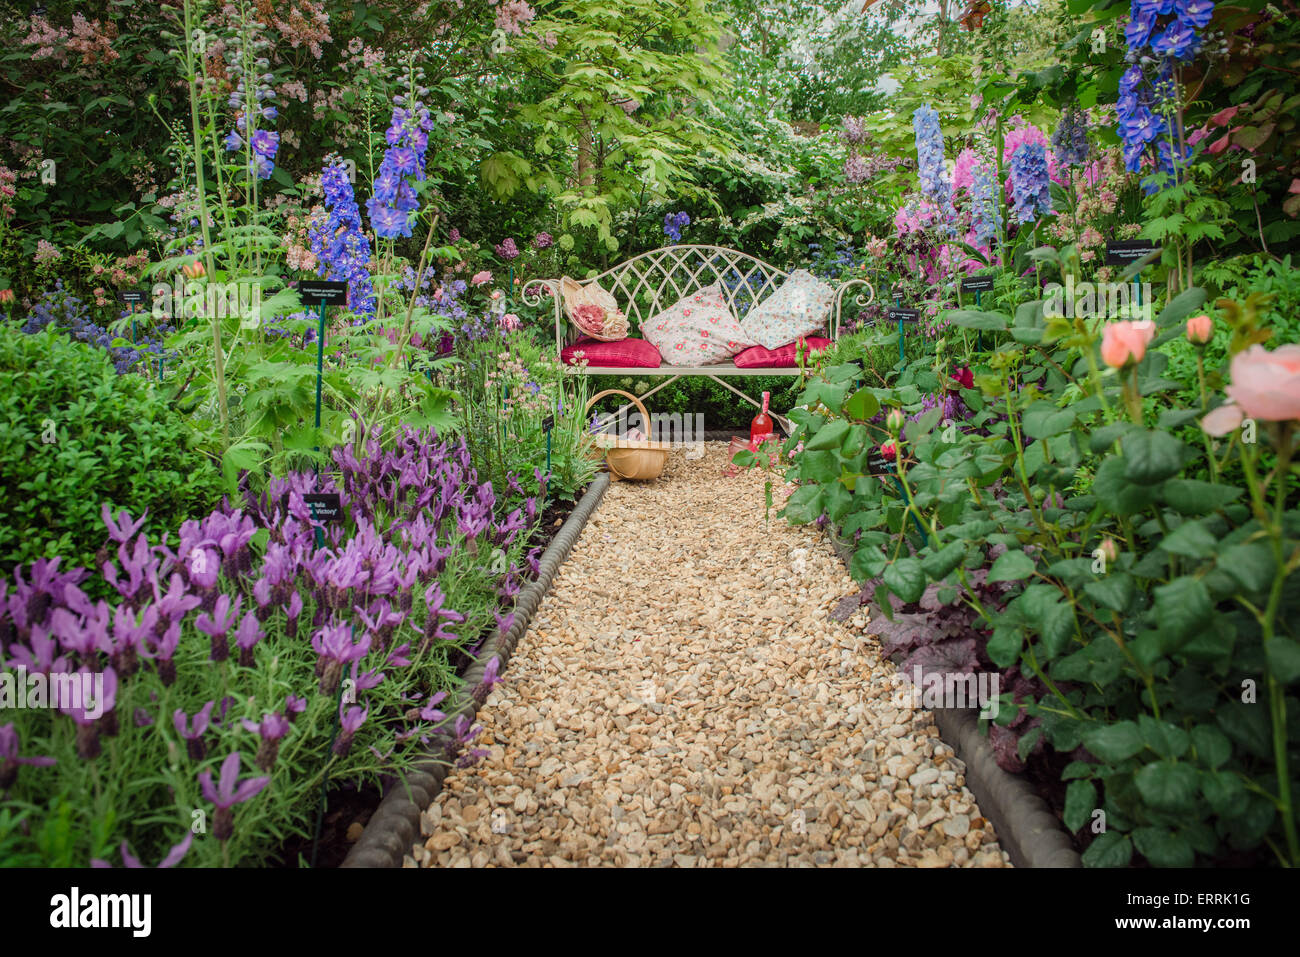 Chelsea Flower Show 2015, bench in the garden surrounded by flowers with gravel path Stock Photo